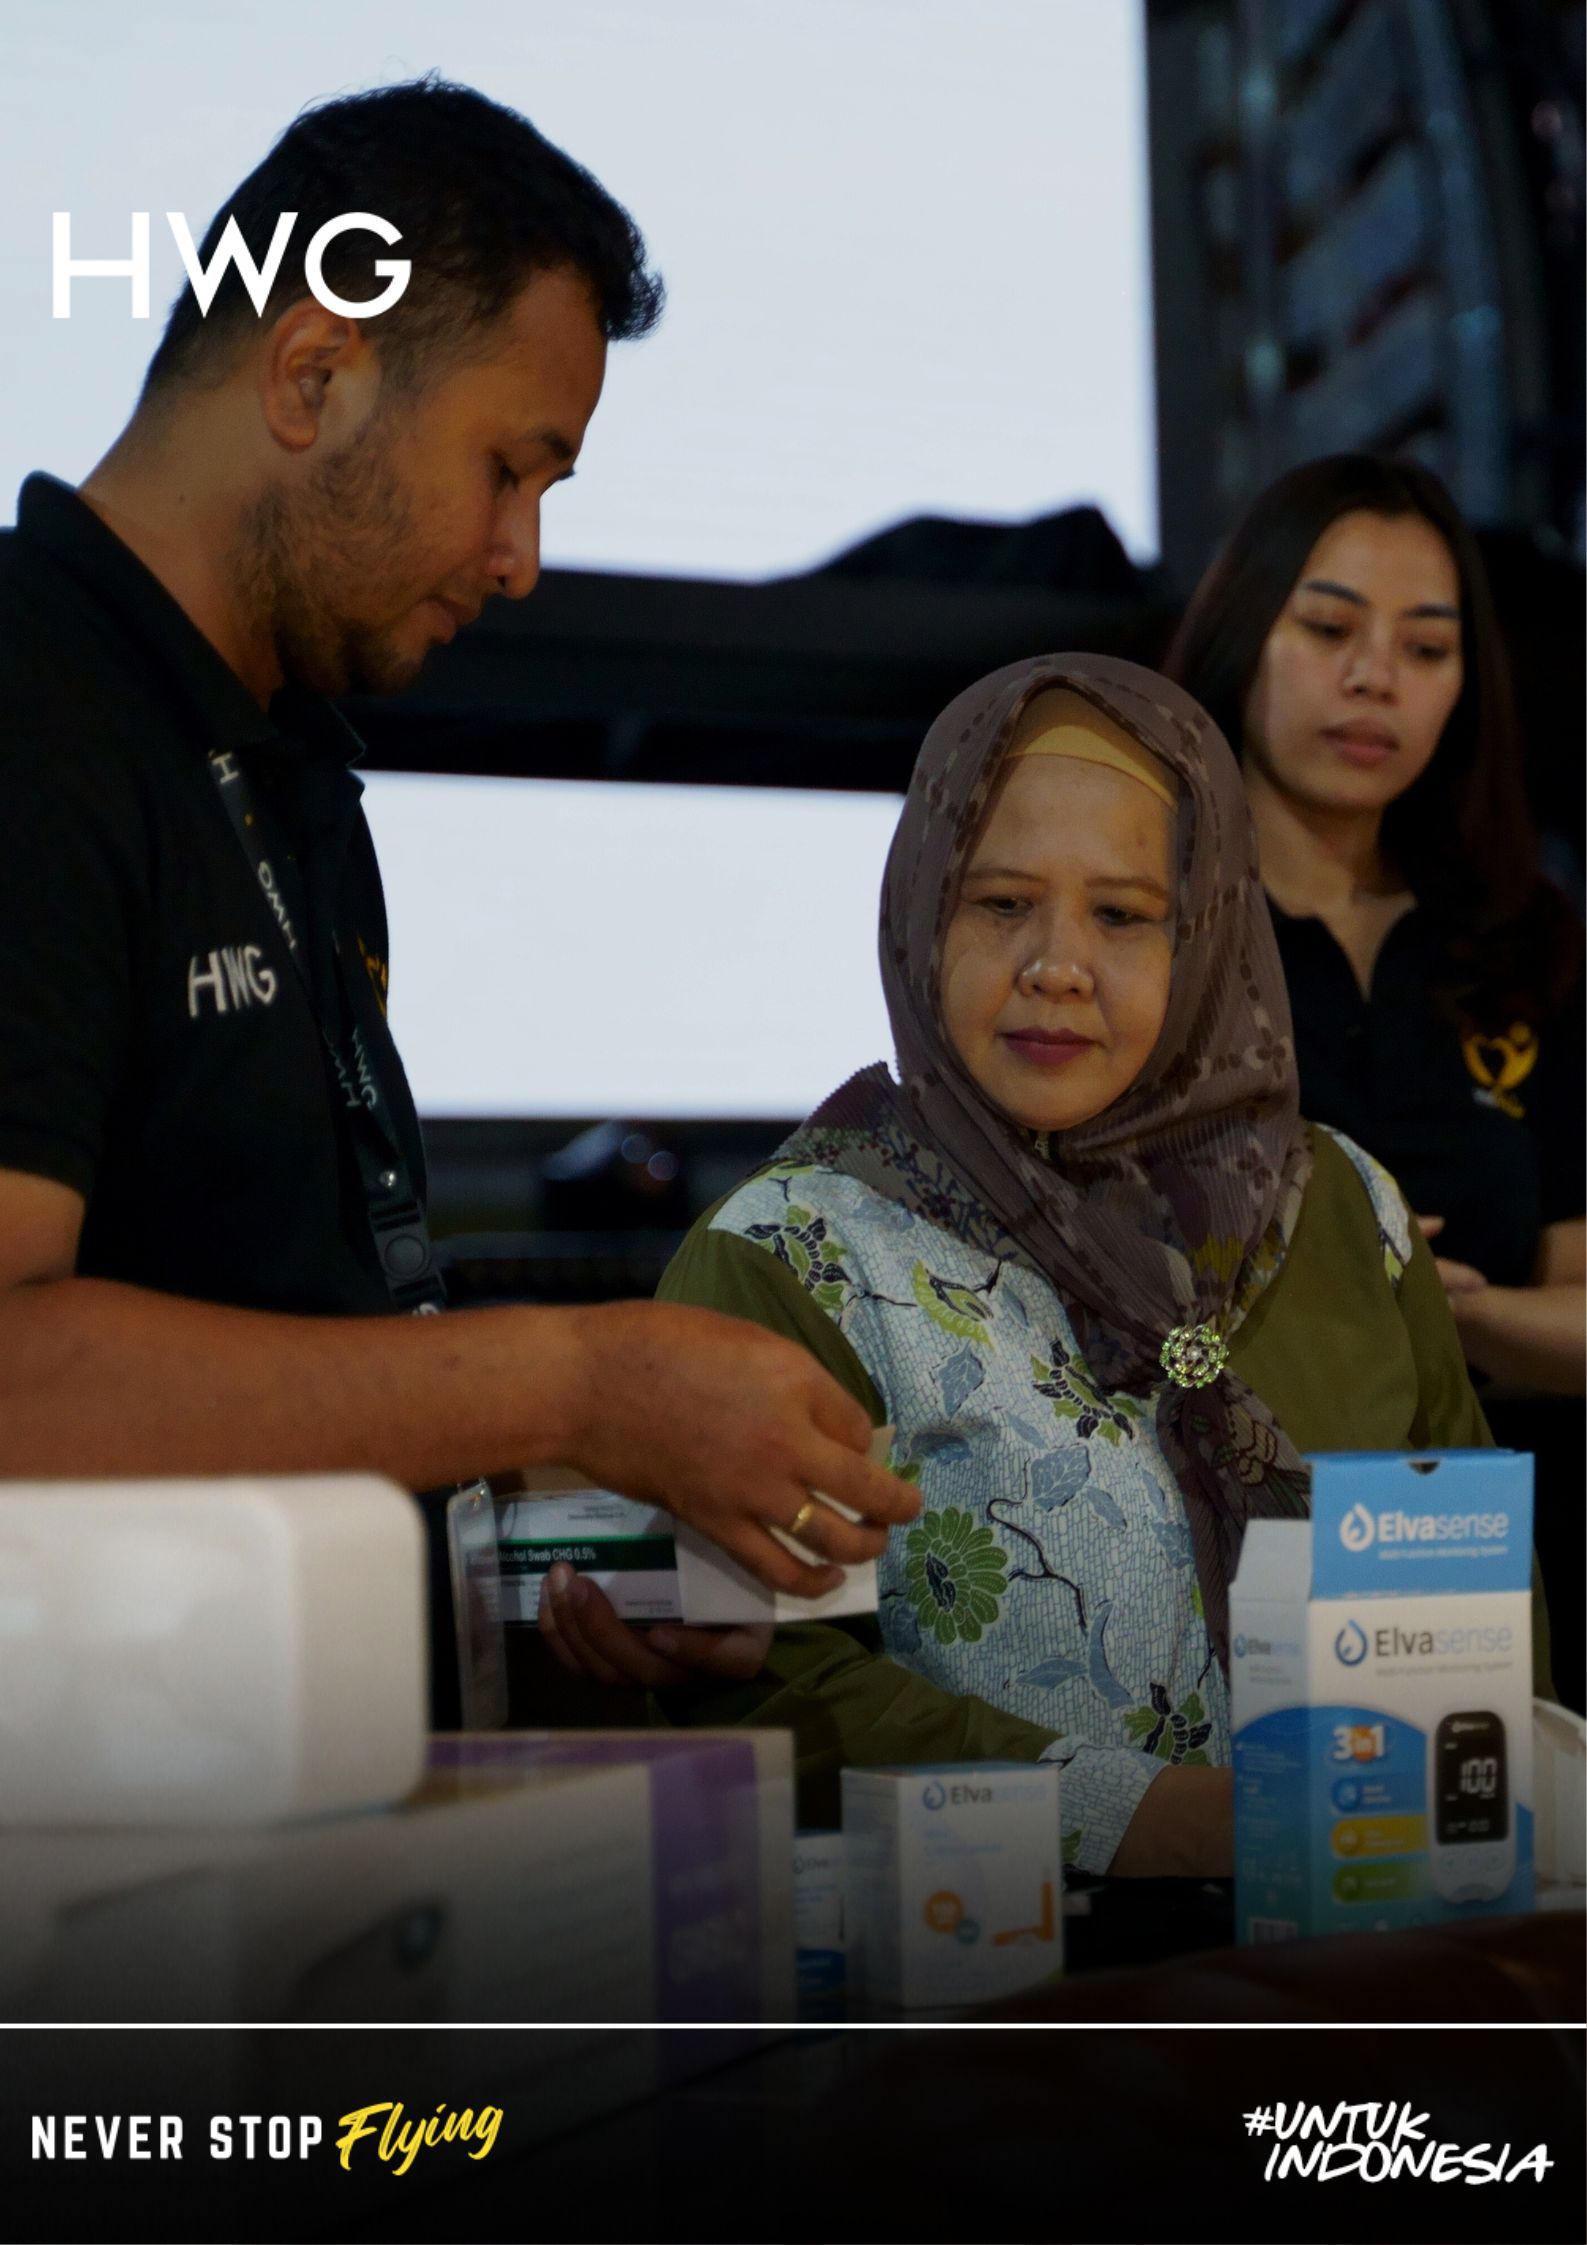 HW Peduli presents goodness by sharing healthcare assistance